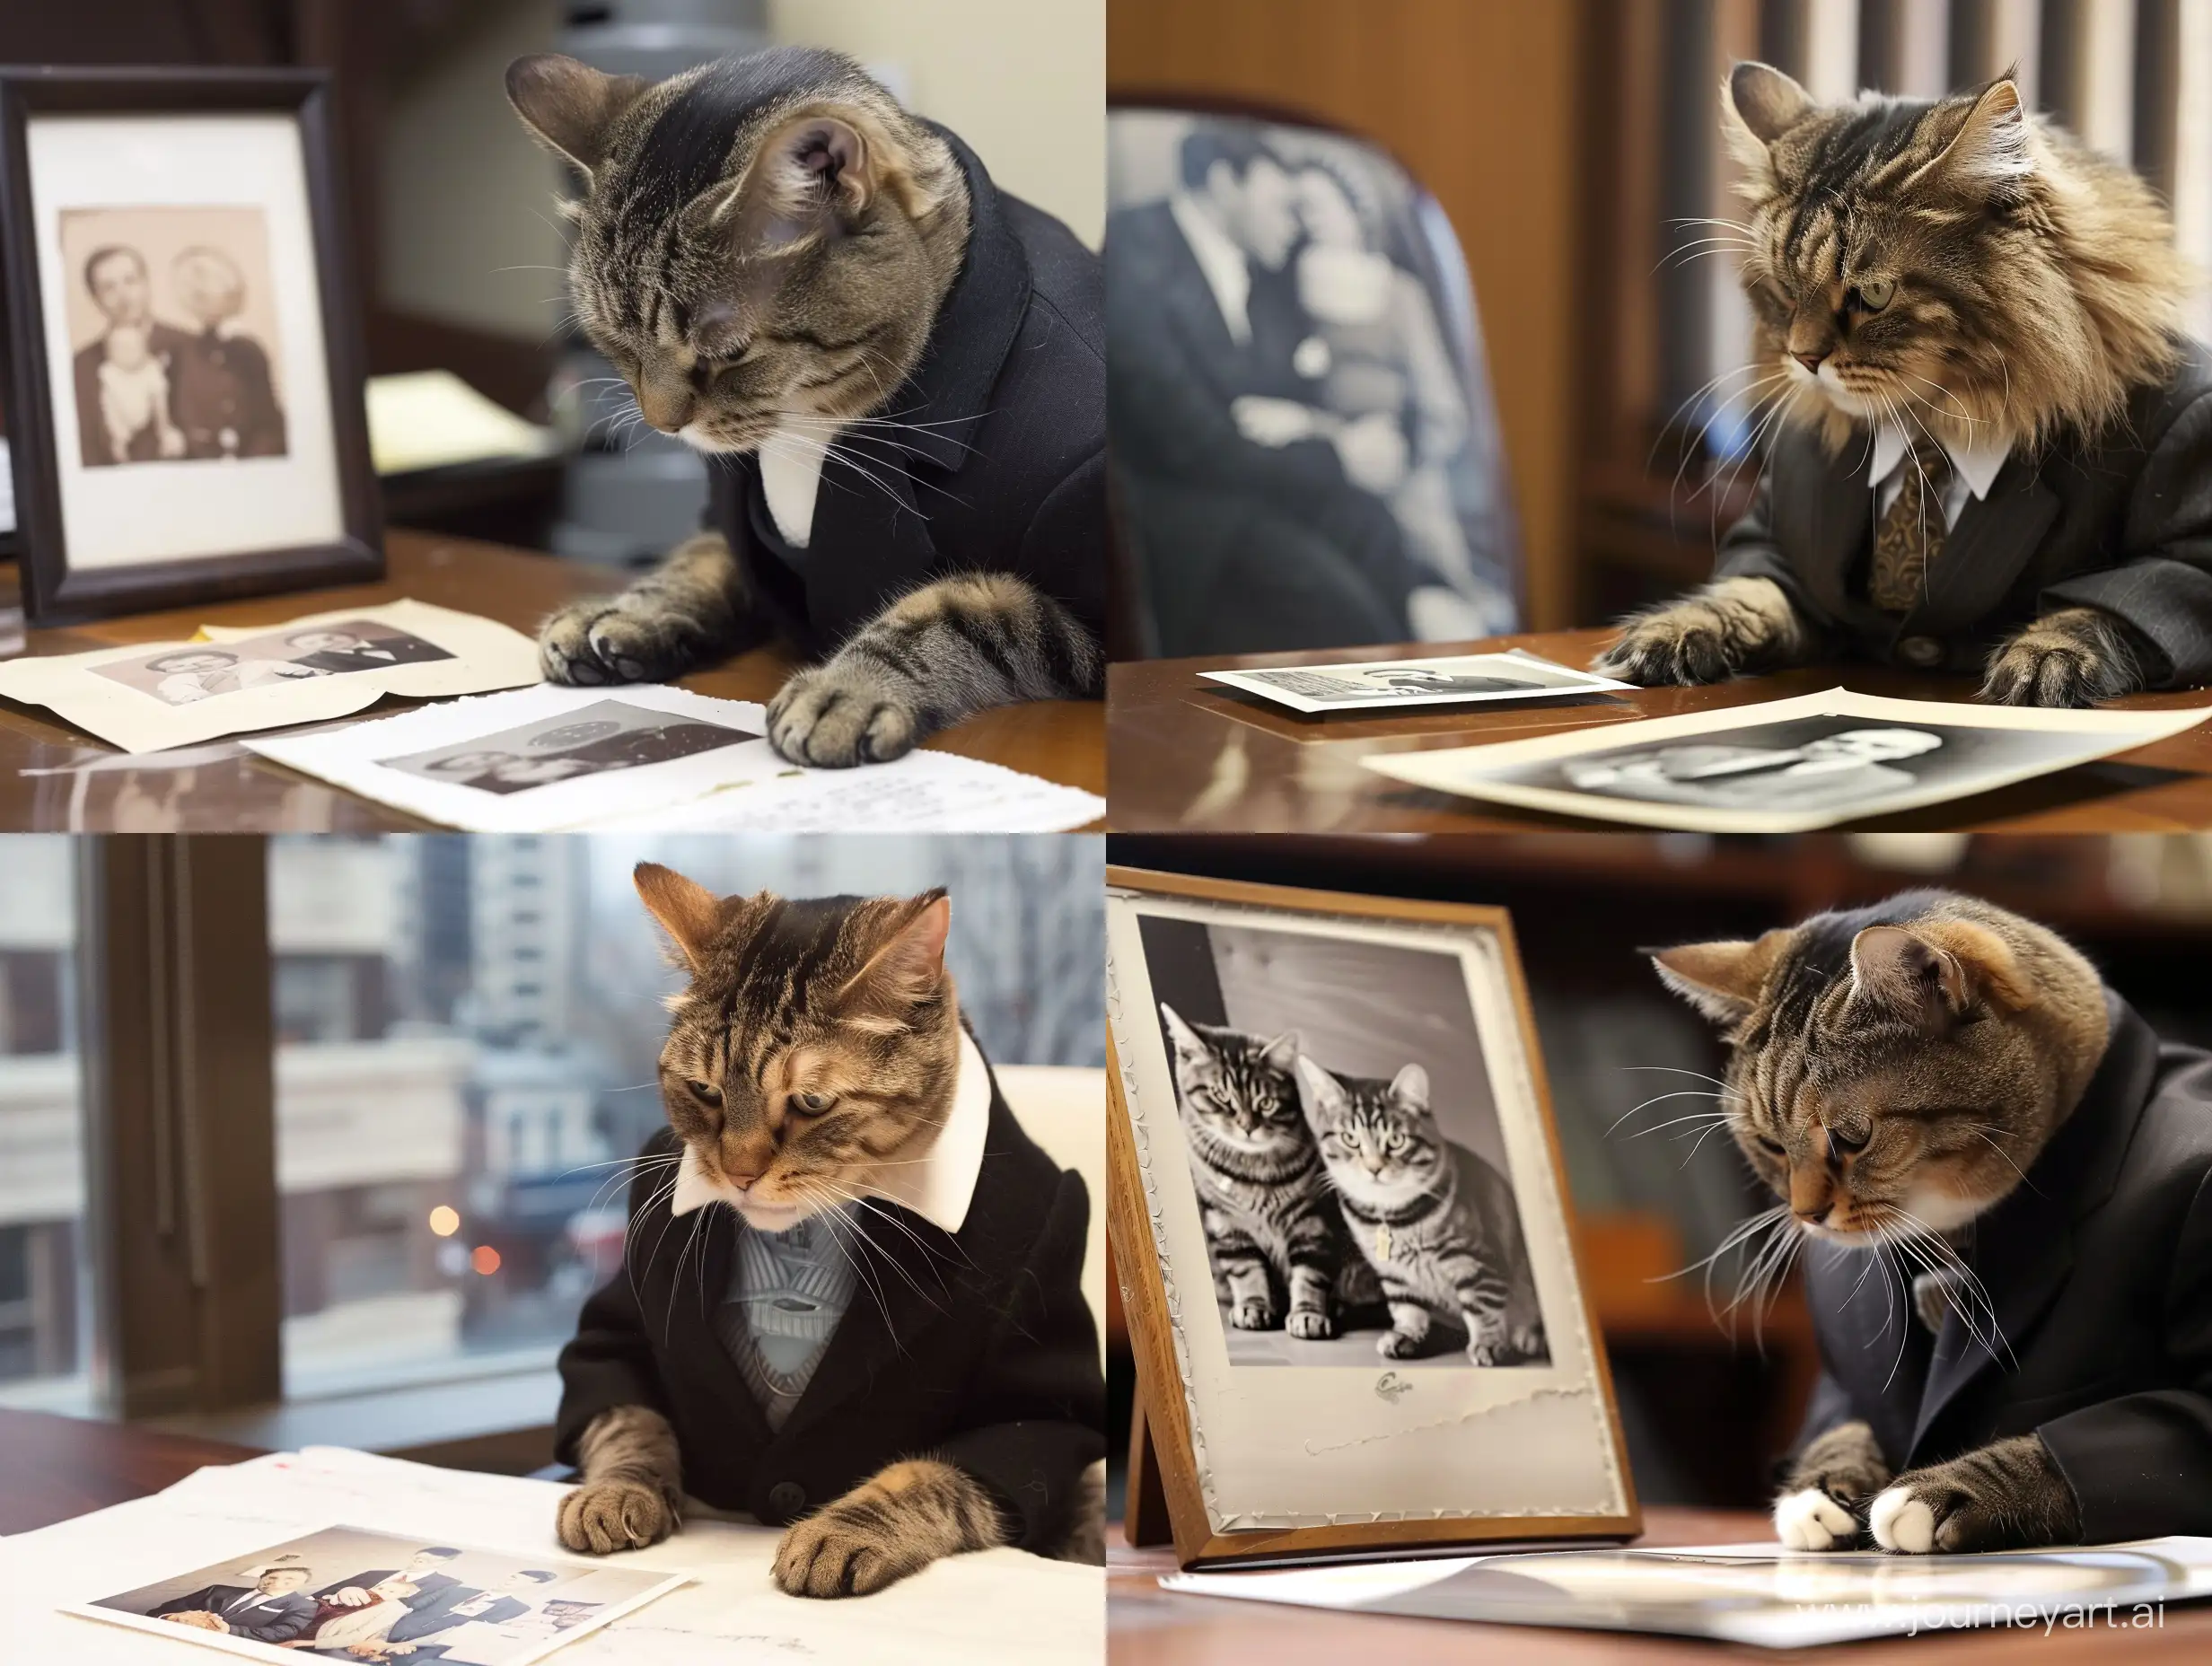 Sad-Cat-in-Office-Suit-Gazing-at-Family-Photo